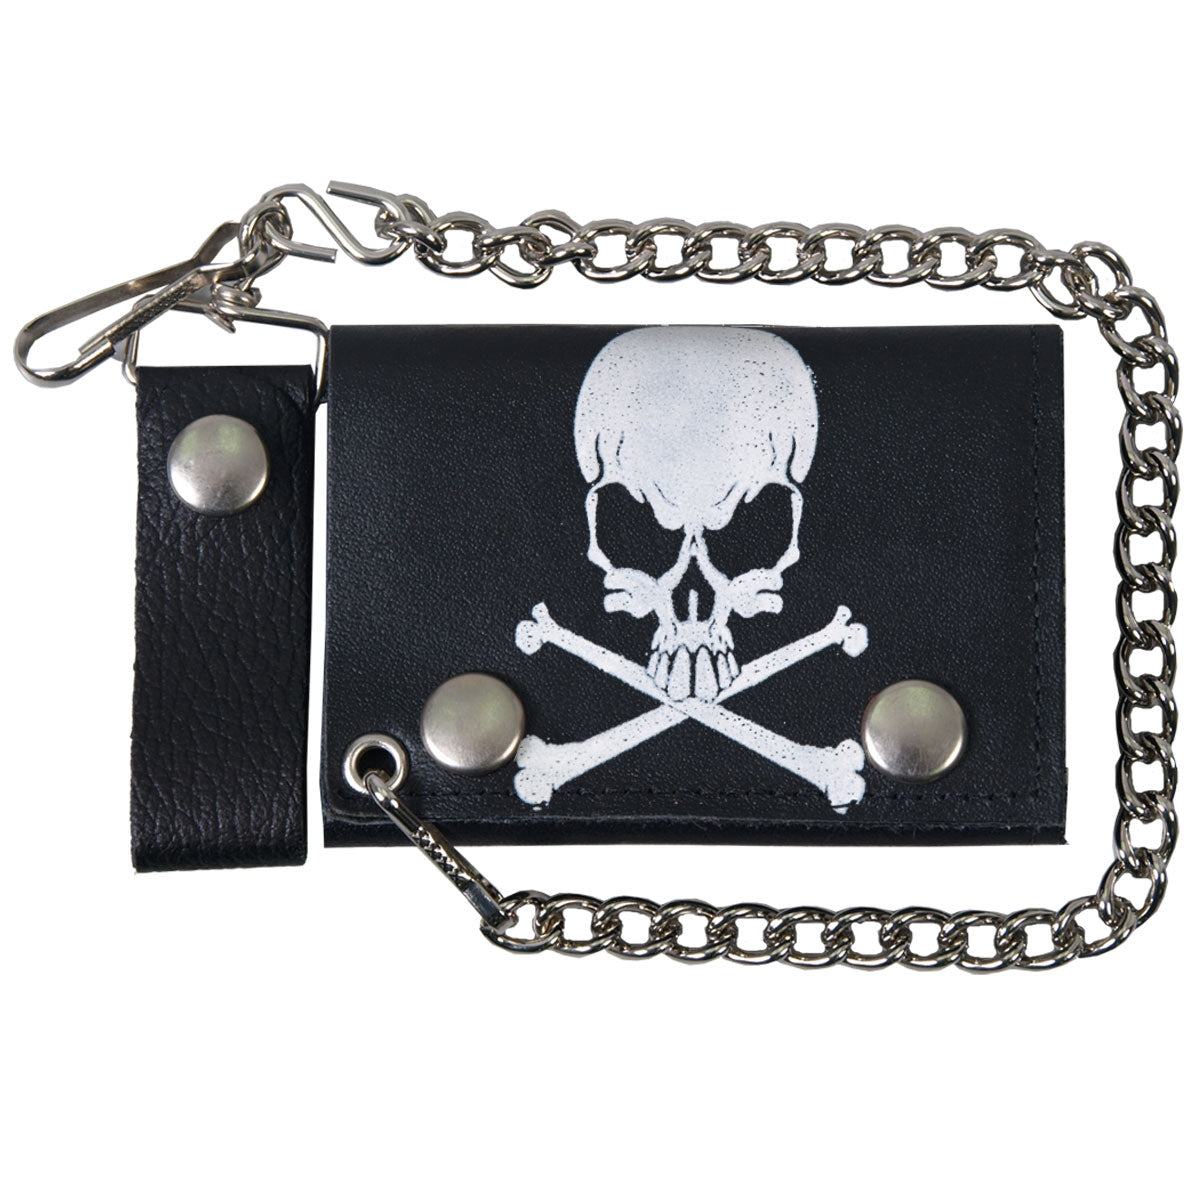 Hot Leathers Skull and Crossbones Wallet